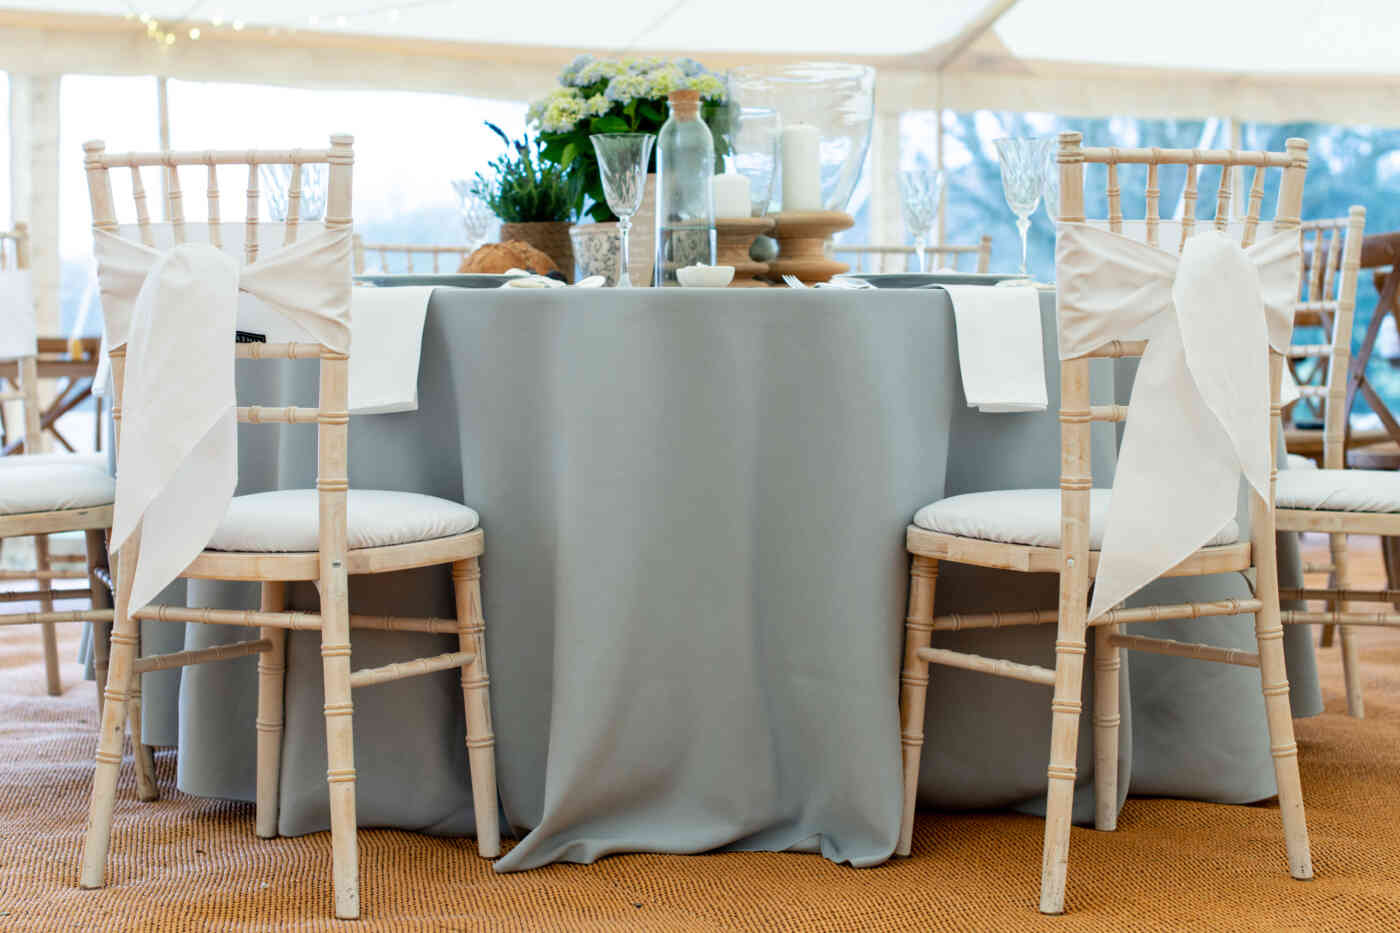 Tablecloth Size Guide Table Linen Hire, What Size Tablecloth For 8 Ft Banquet Table